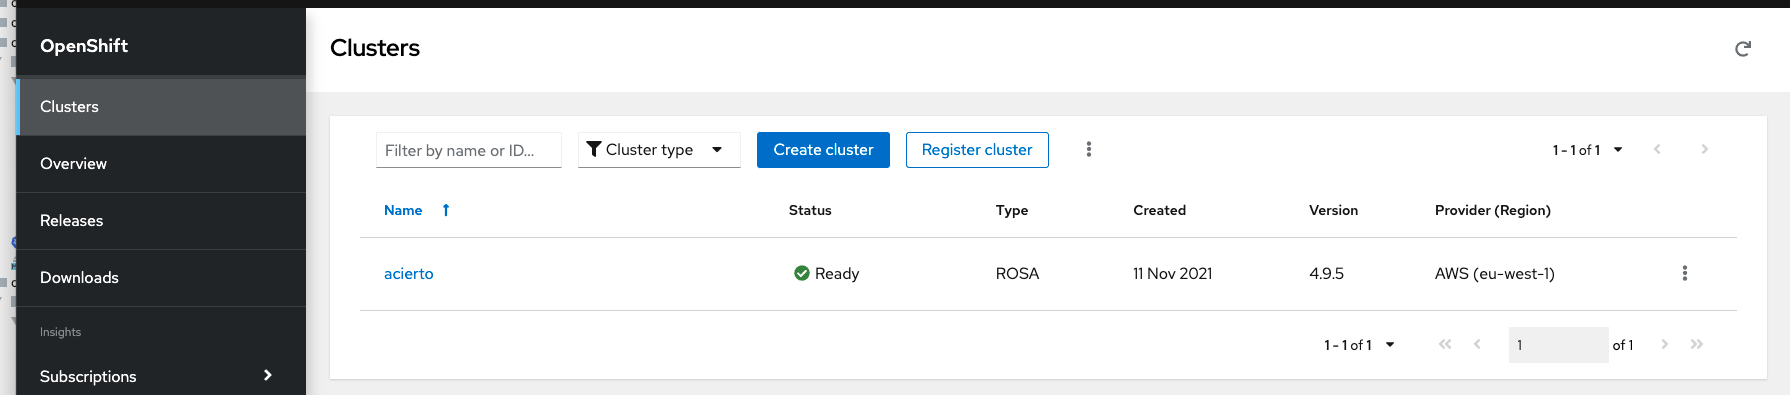 Openshift Clusters